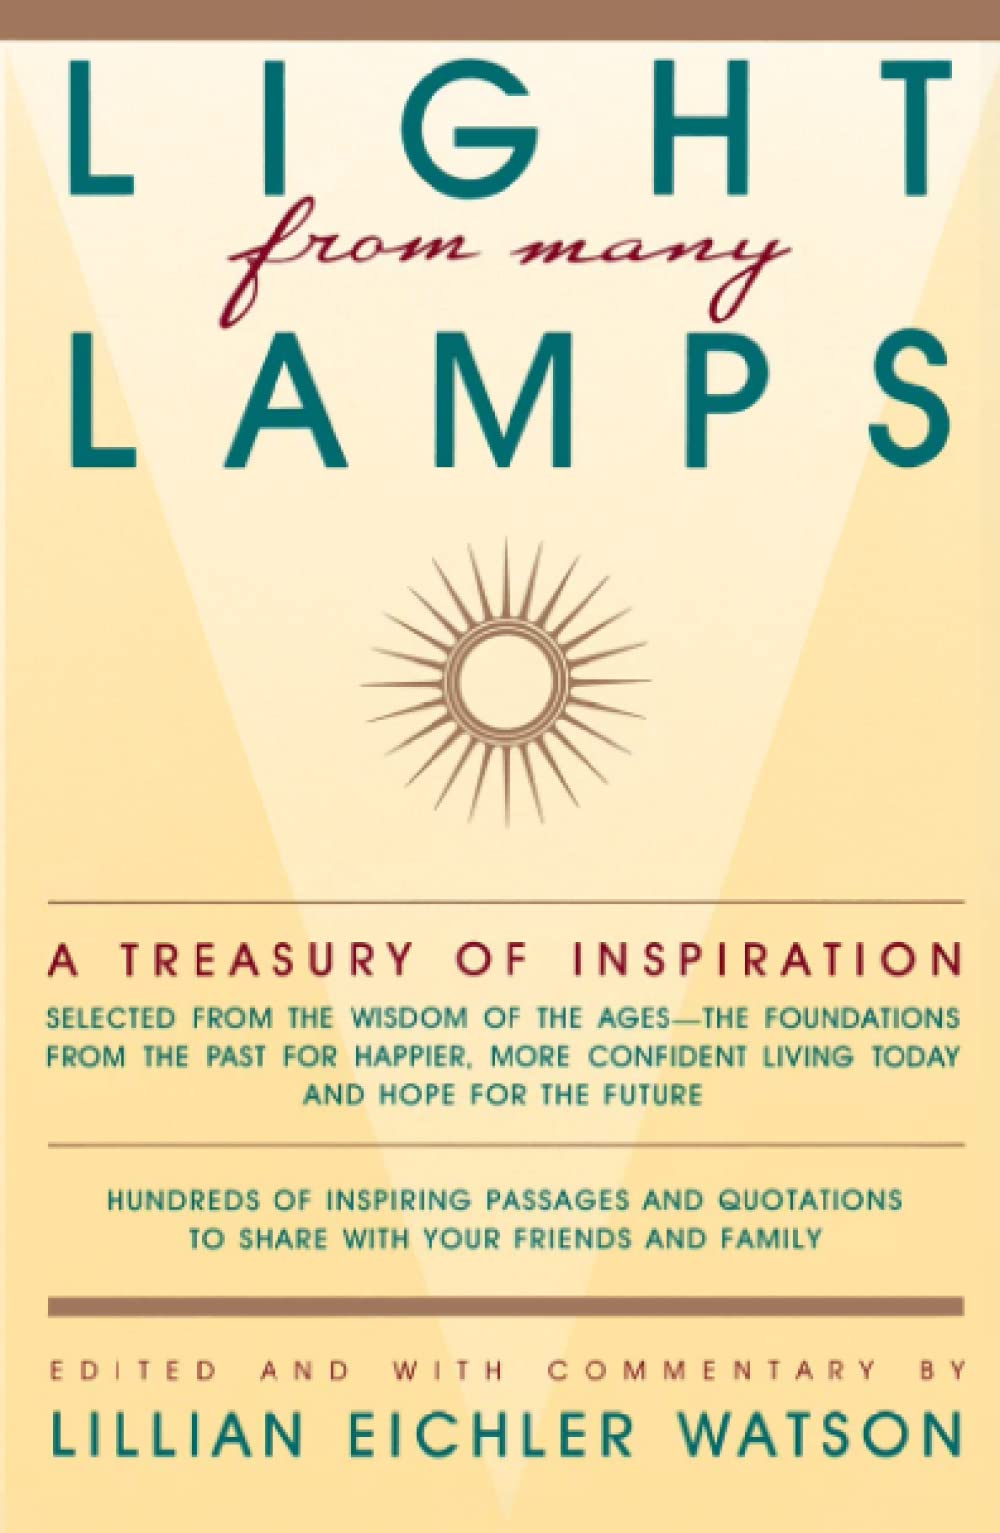 Light from Many Lamps: A Treasury of Inspiration by Lillian Eichler Watson